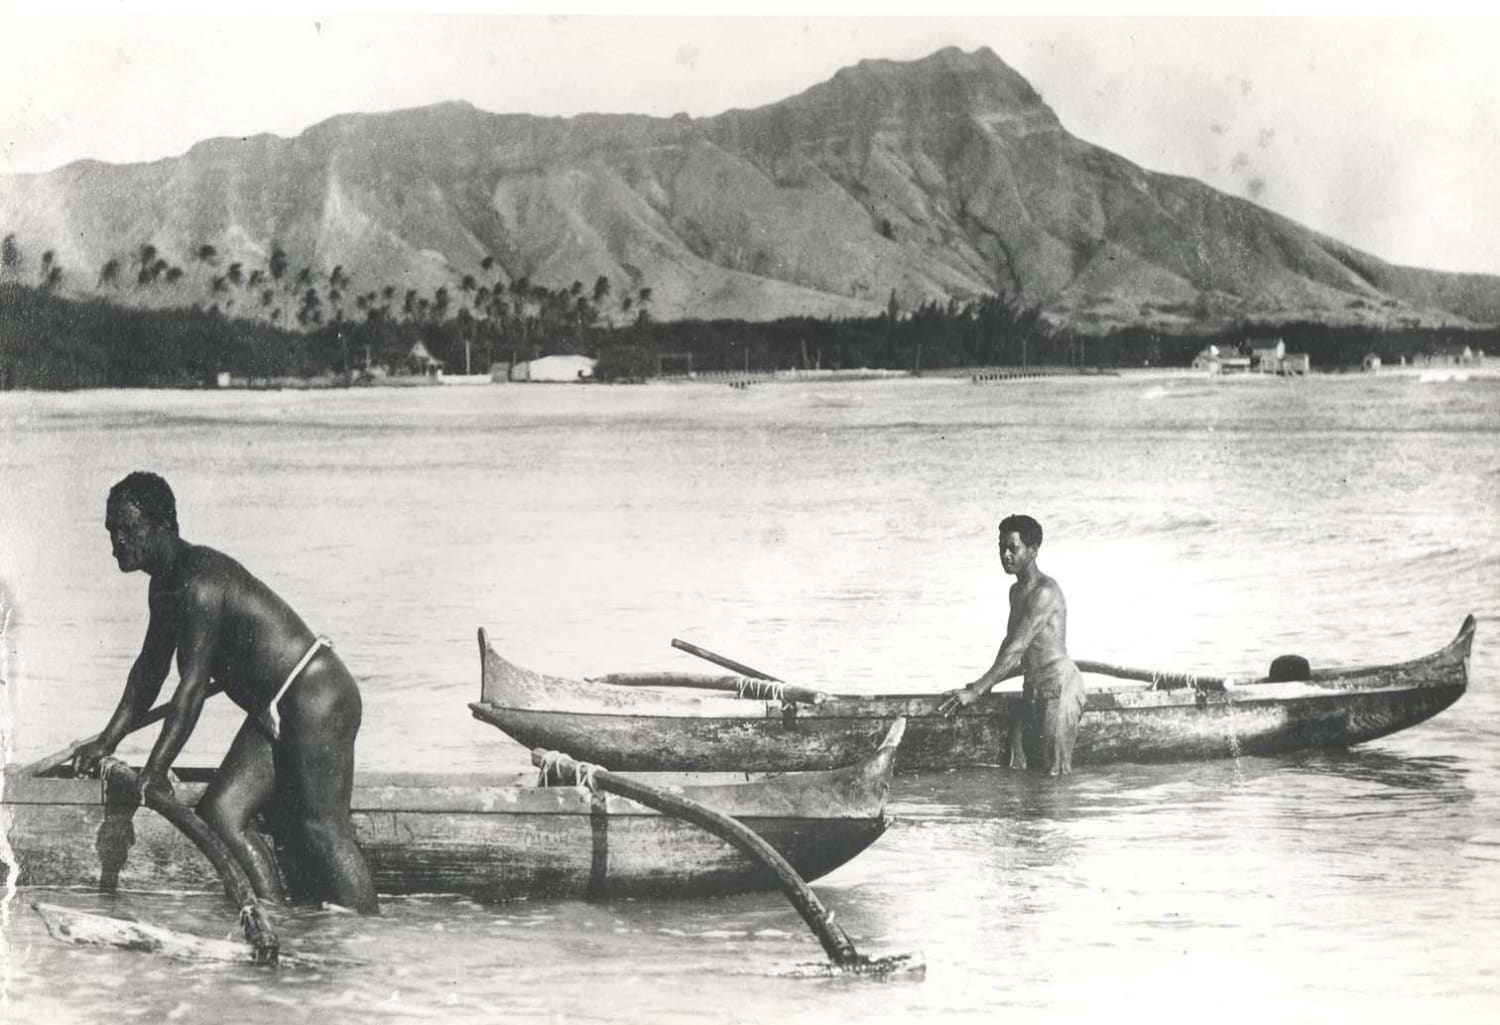 Natives of Hawaii on the beach of Waikiki after a morning of fishing in 1895.